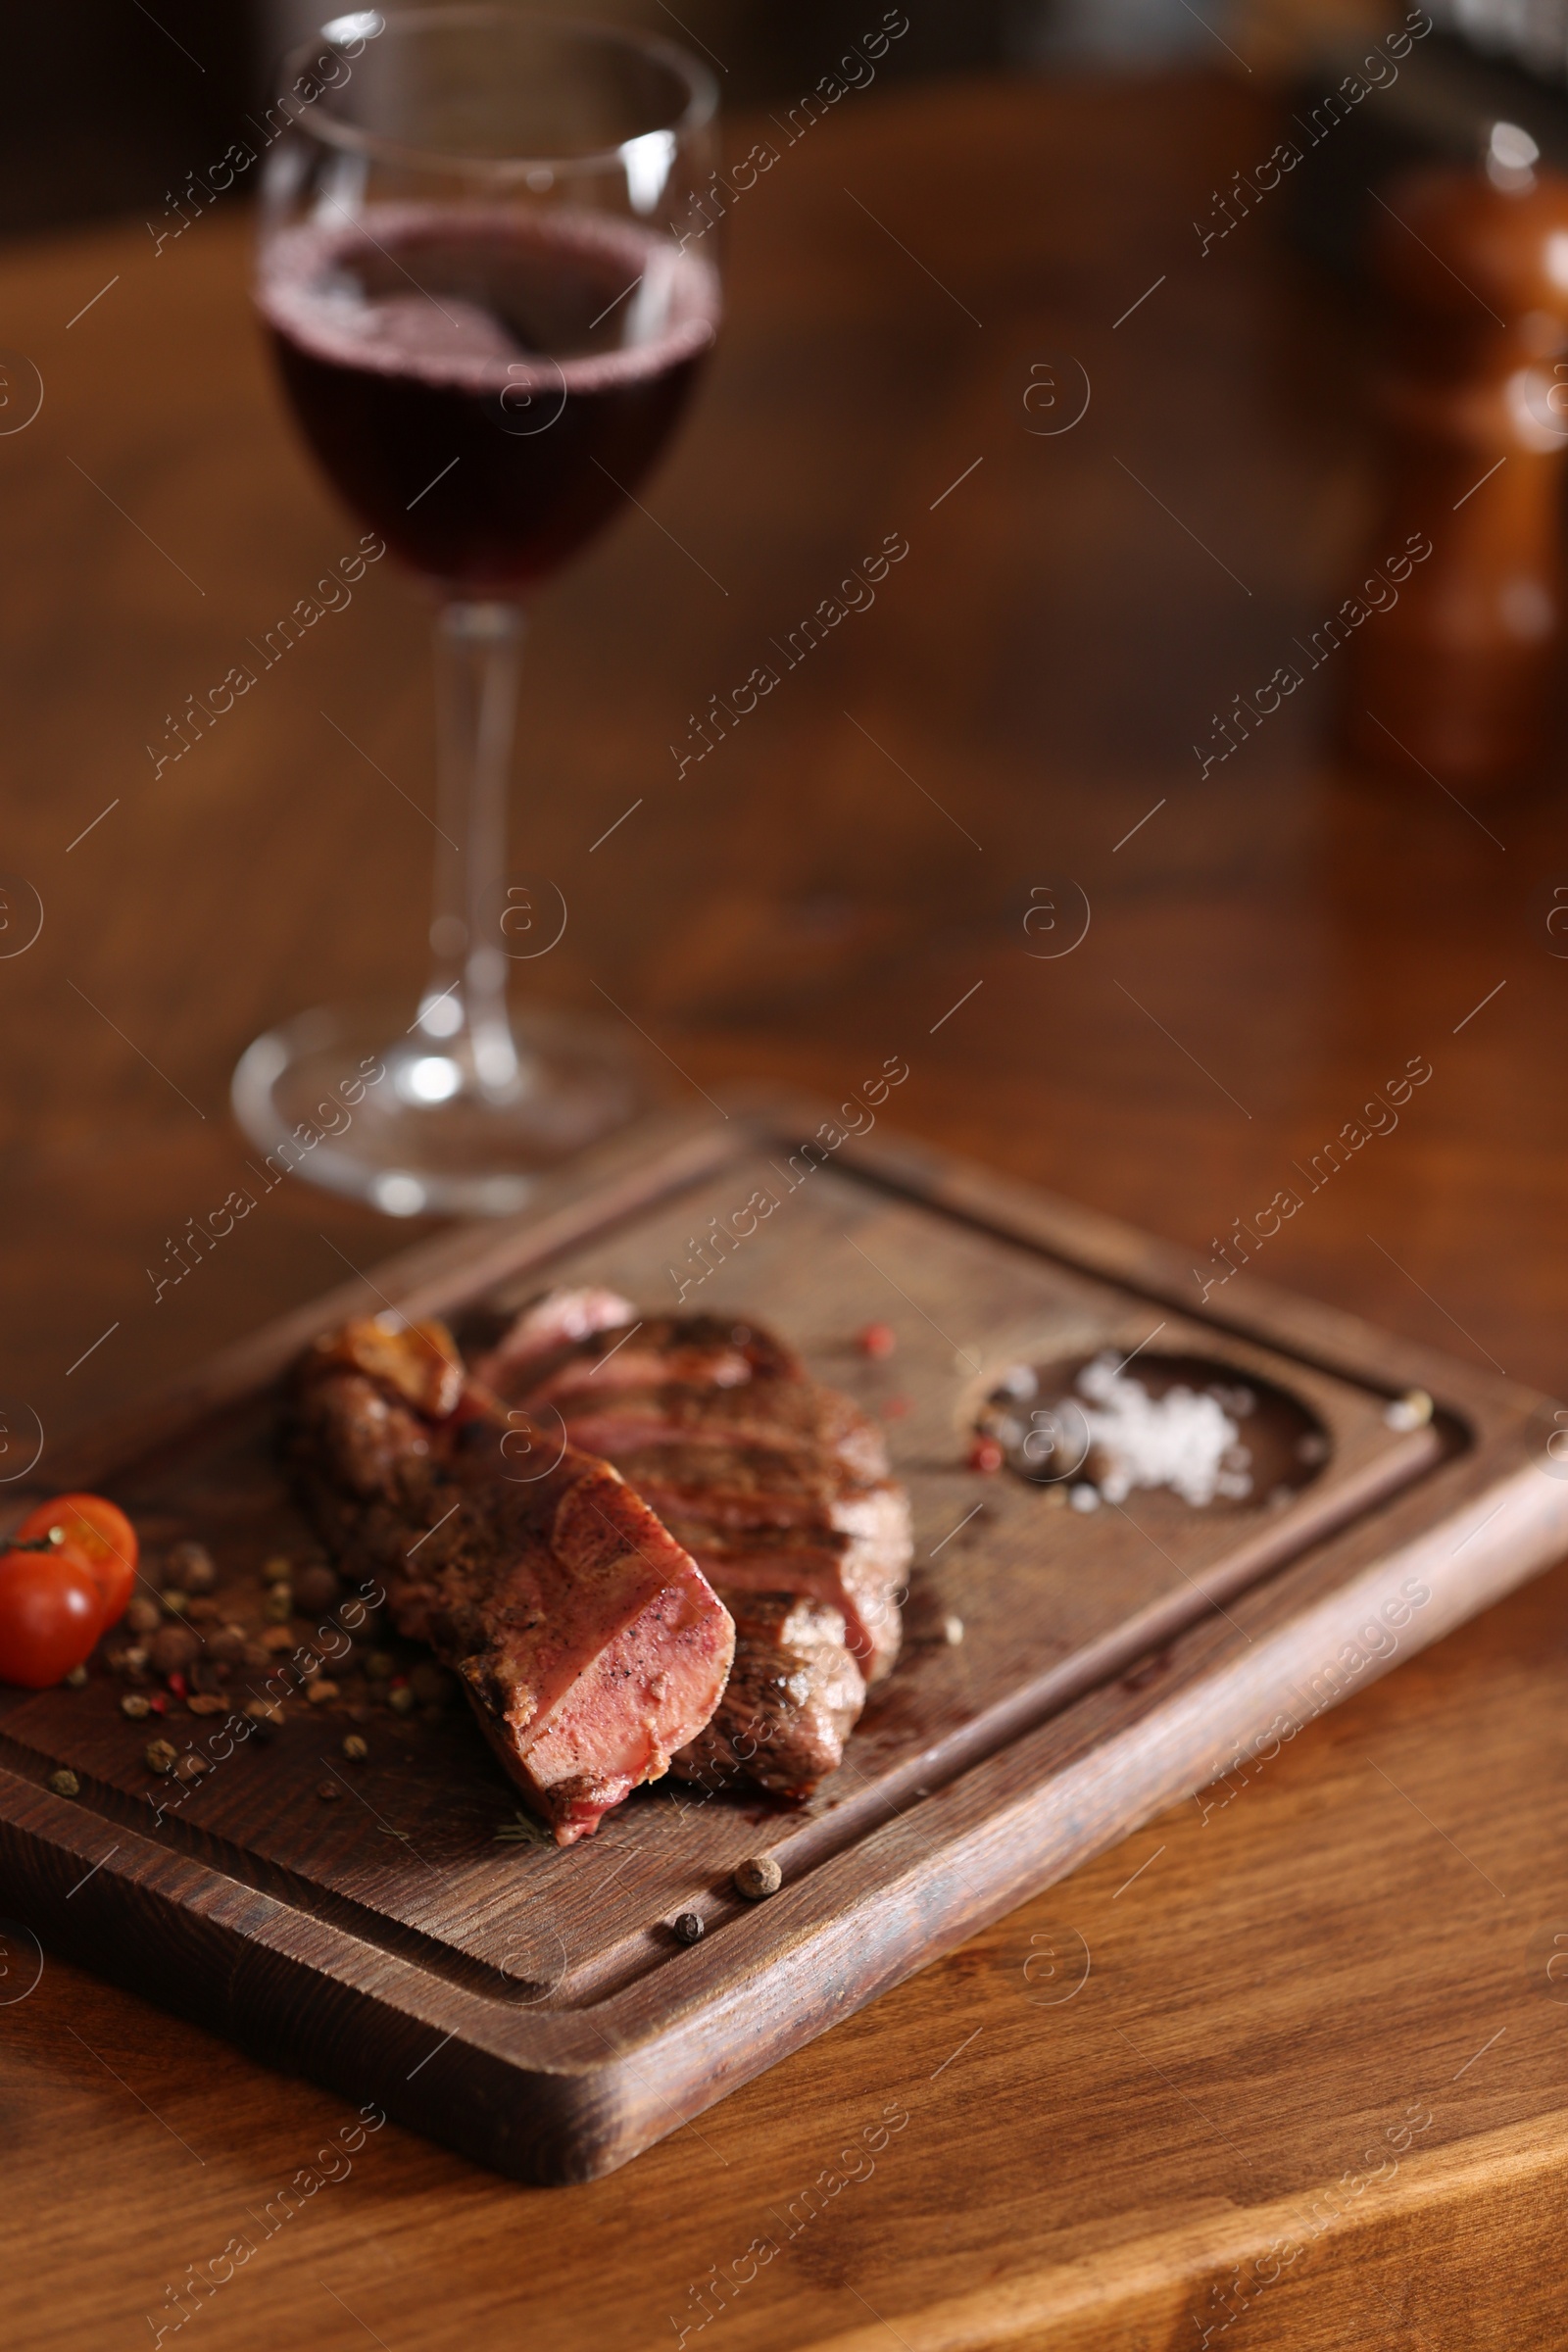 Photo of Tasty roasted meat served on wooden table. Cooking food